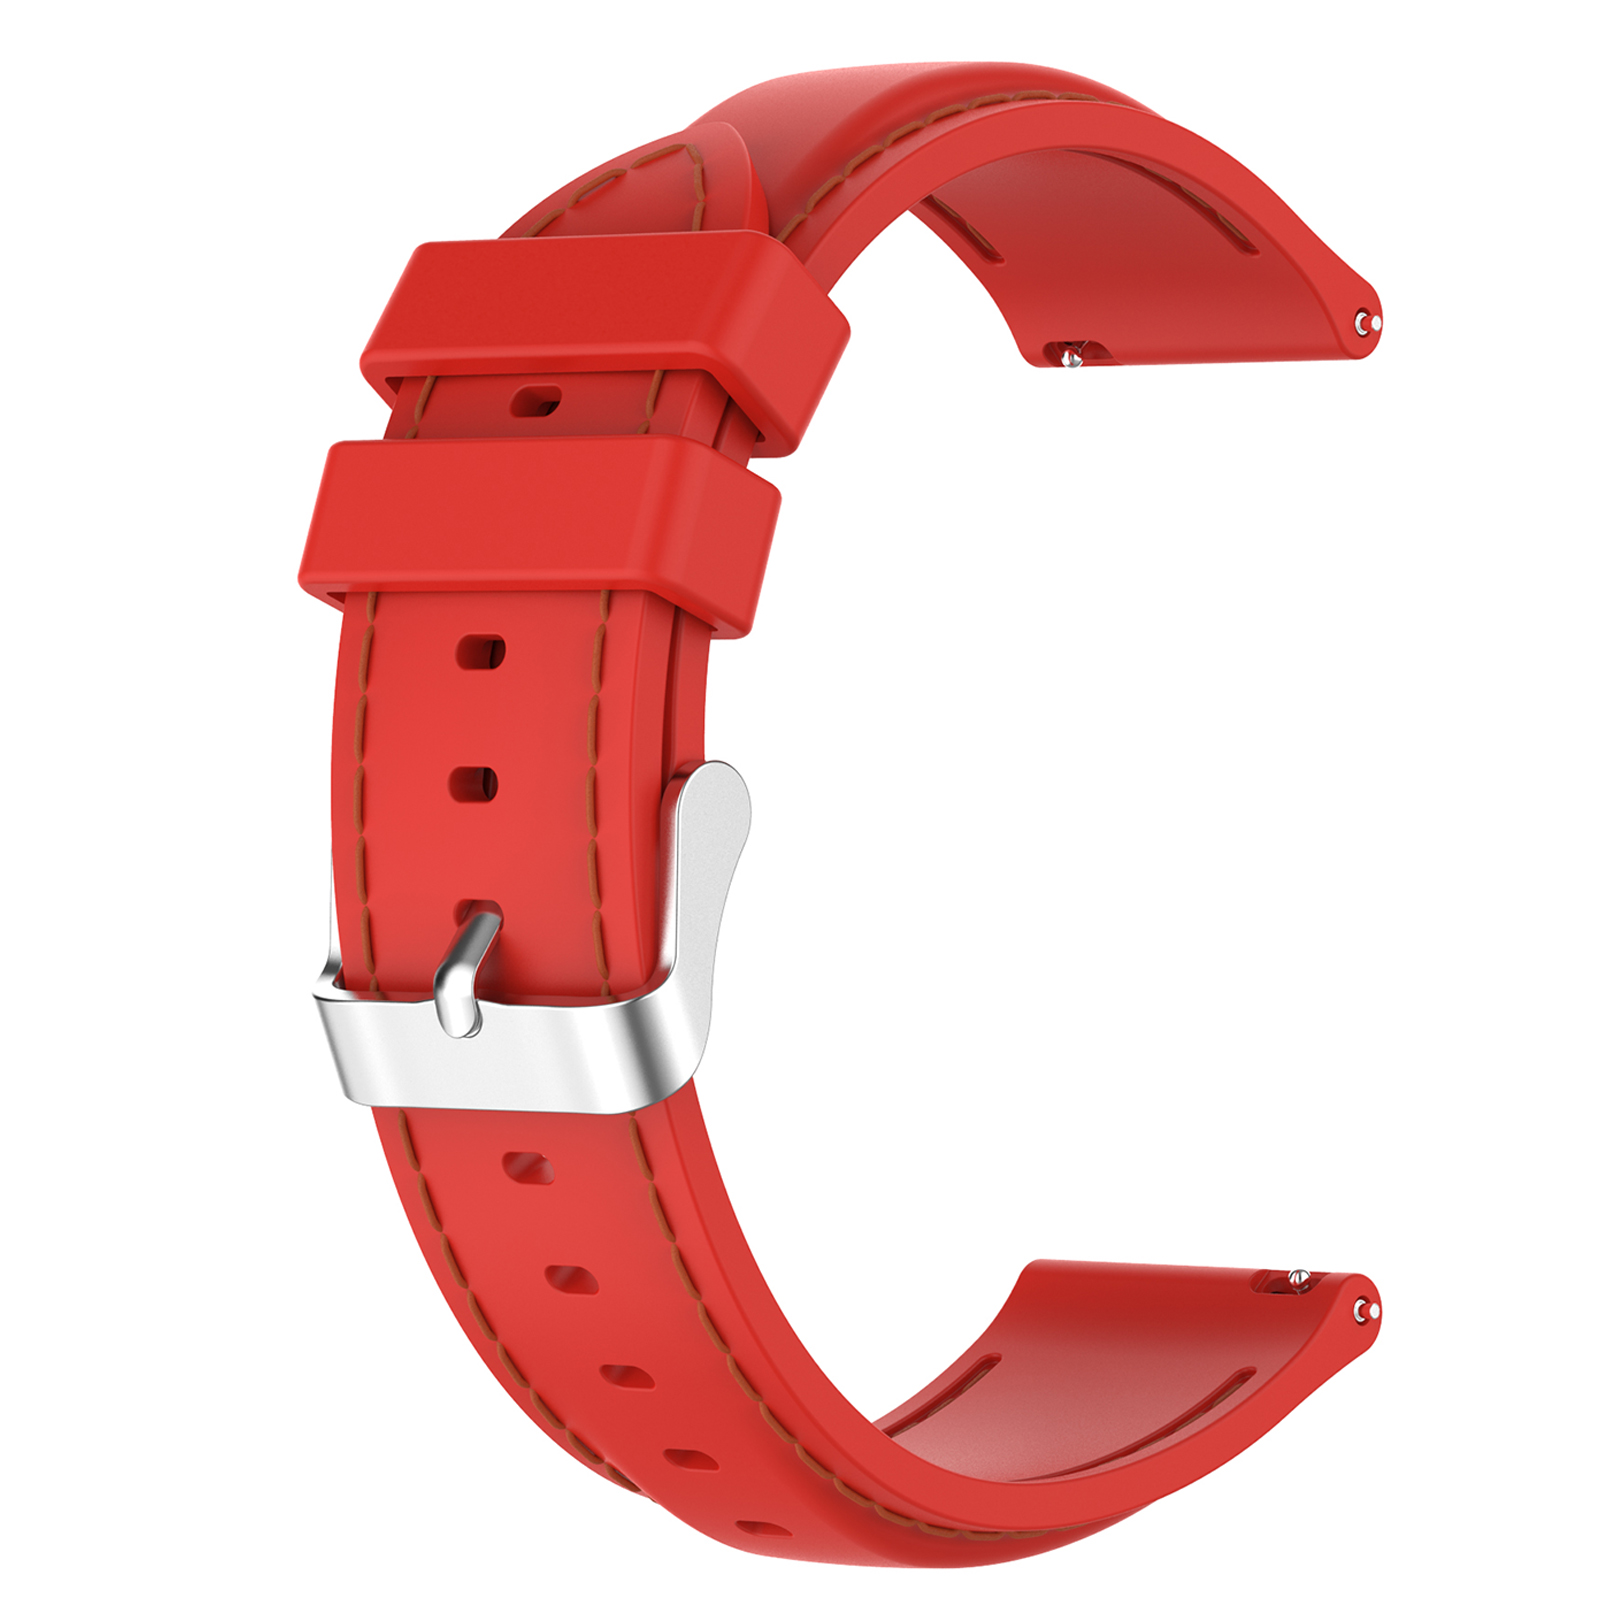 22mm-Soft-Silicone-Watch-Strap-Band-Replacement-Sport-Bracelet-Watchband-For-Ticwatch-Pro3LTE-Haylou-1809083-13